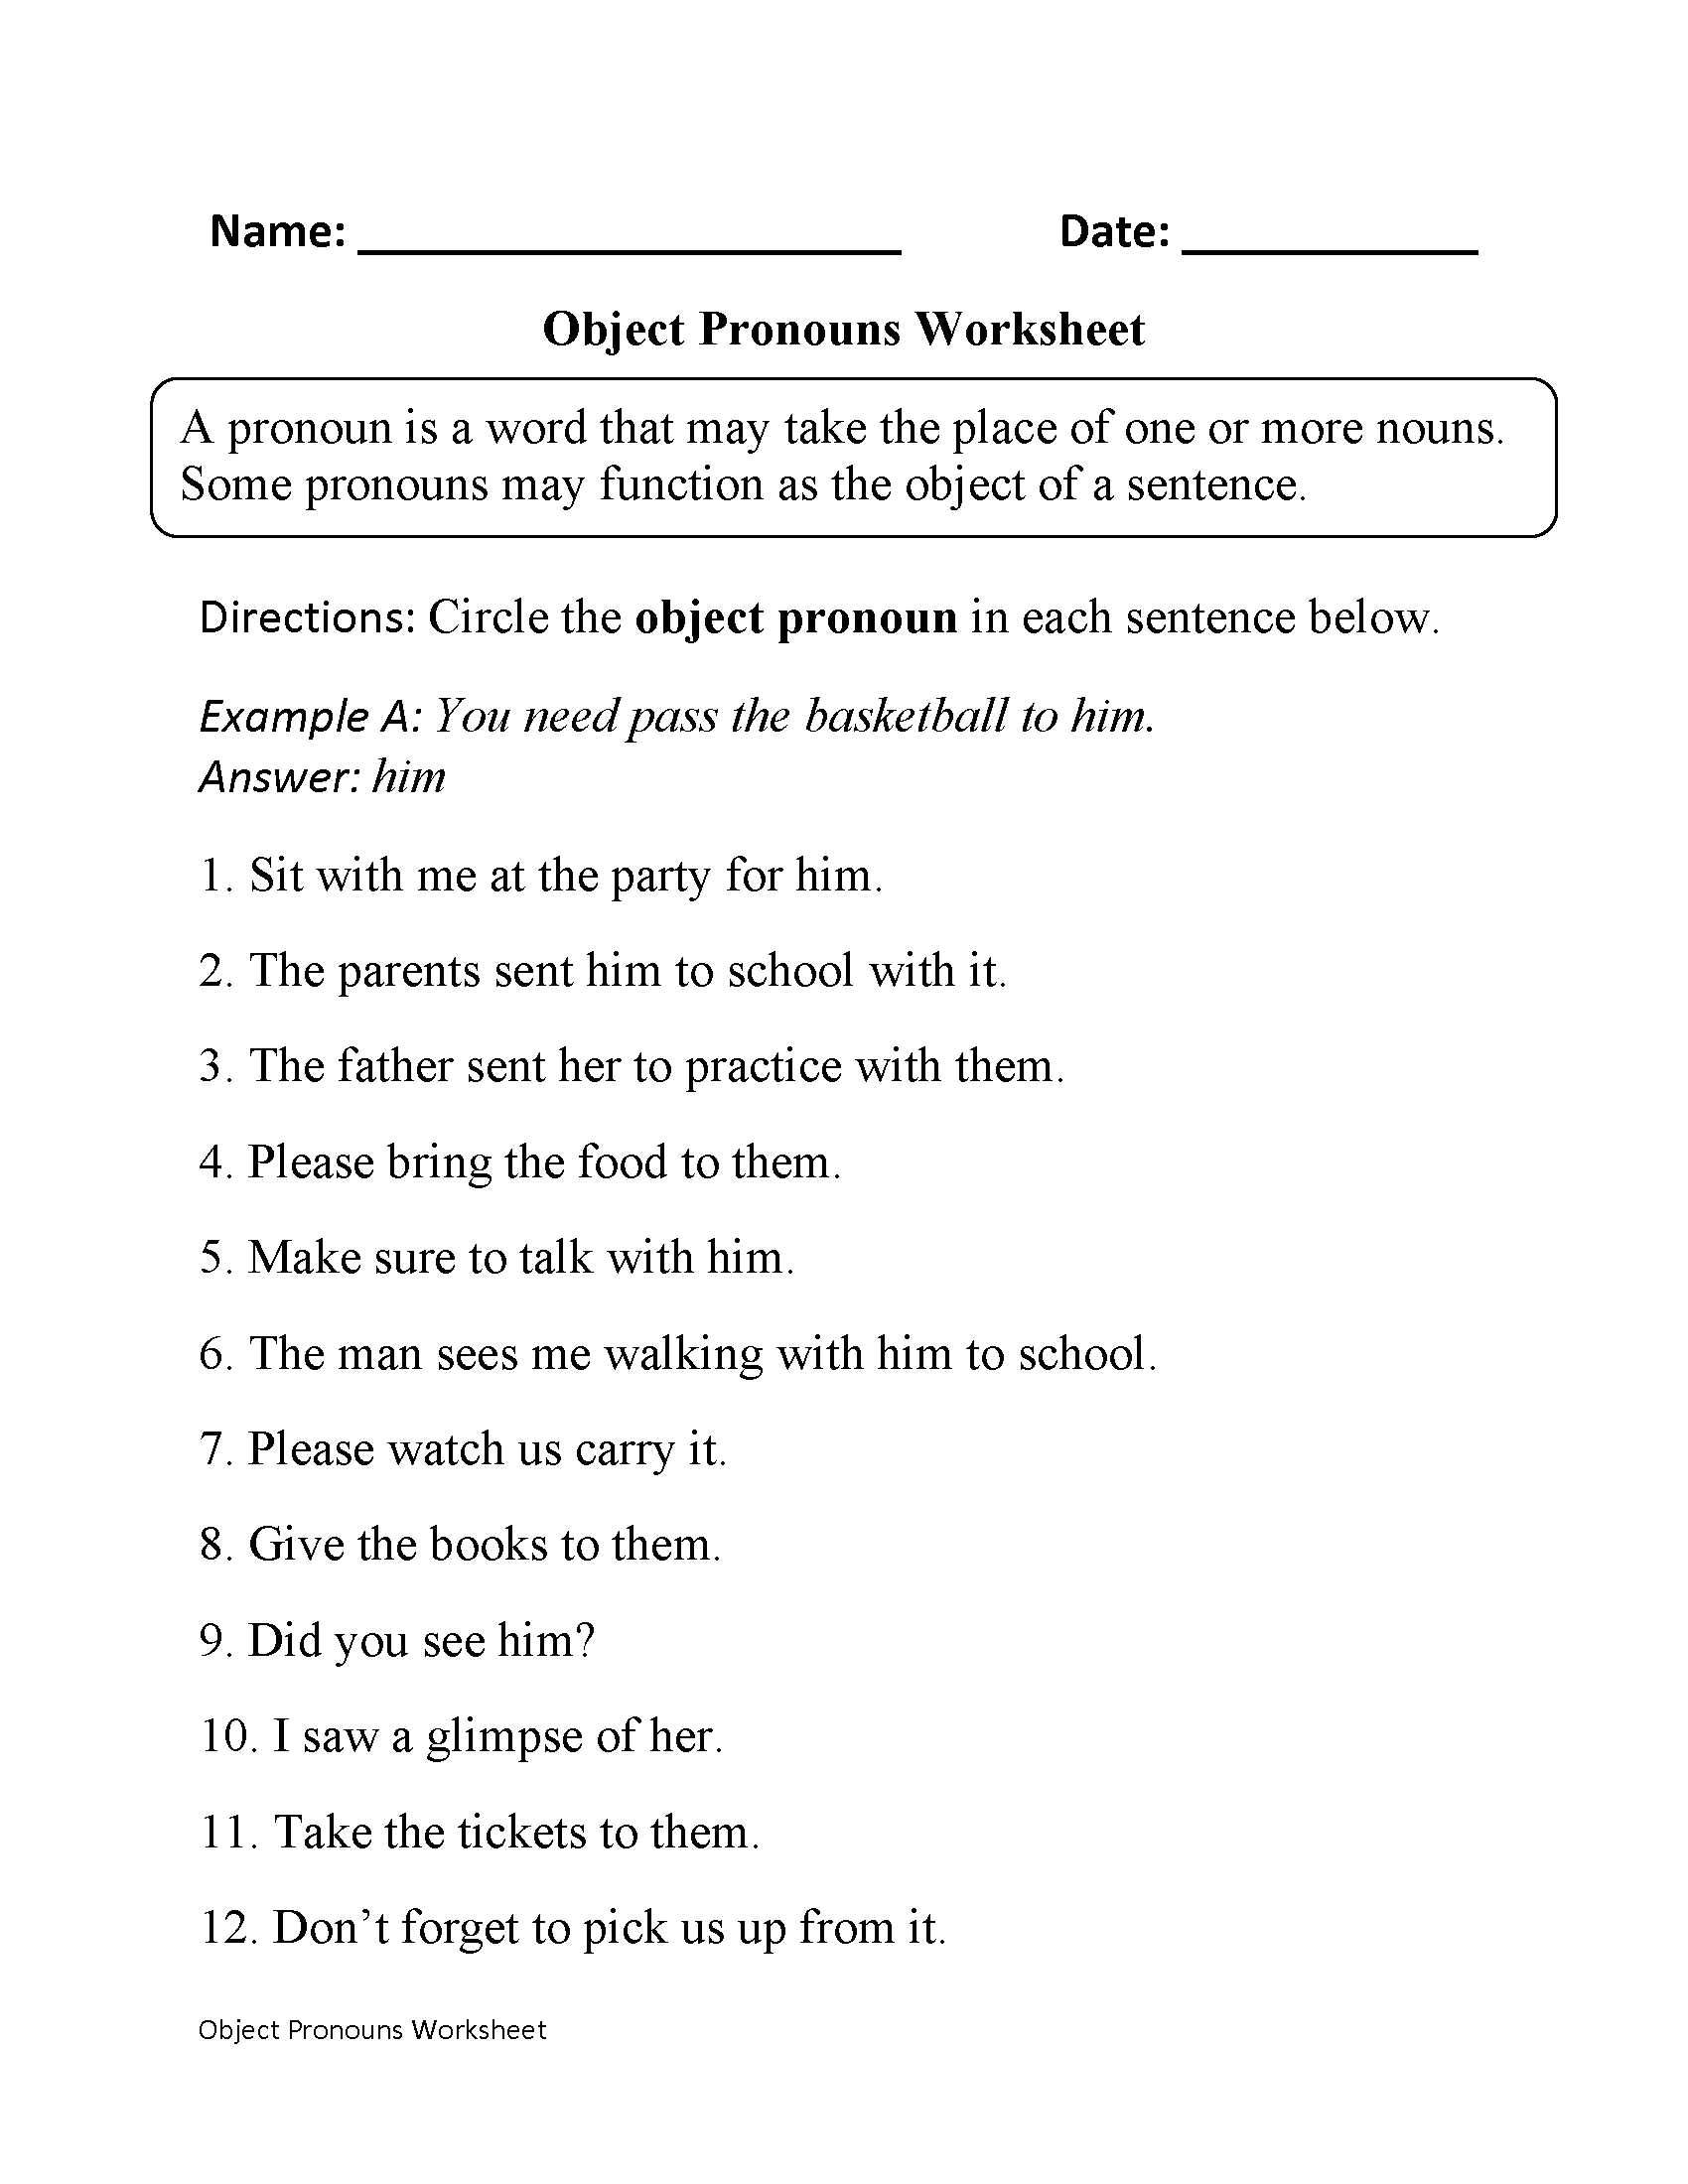 Skills Worksheet Concept Review Answers Along with Schoolexpress Free Worksheets A Great Way to Help